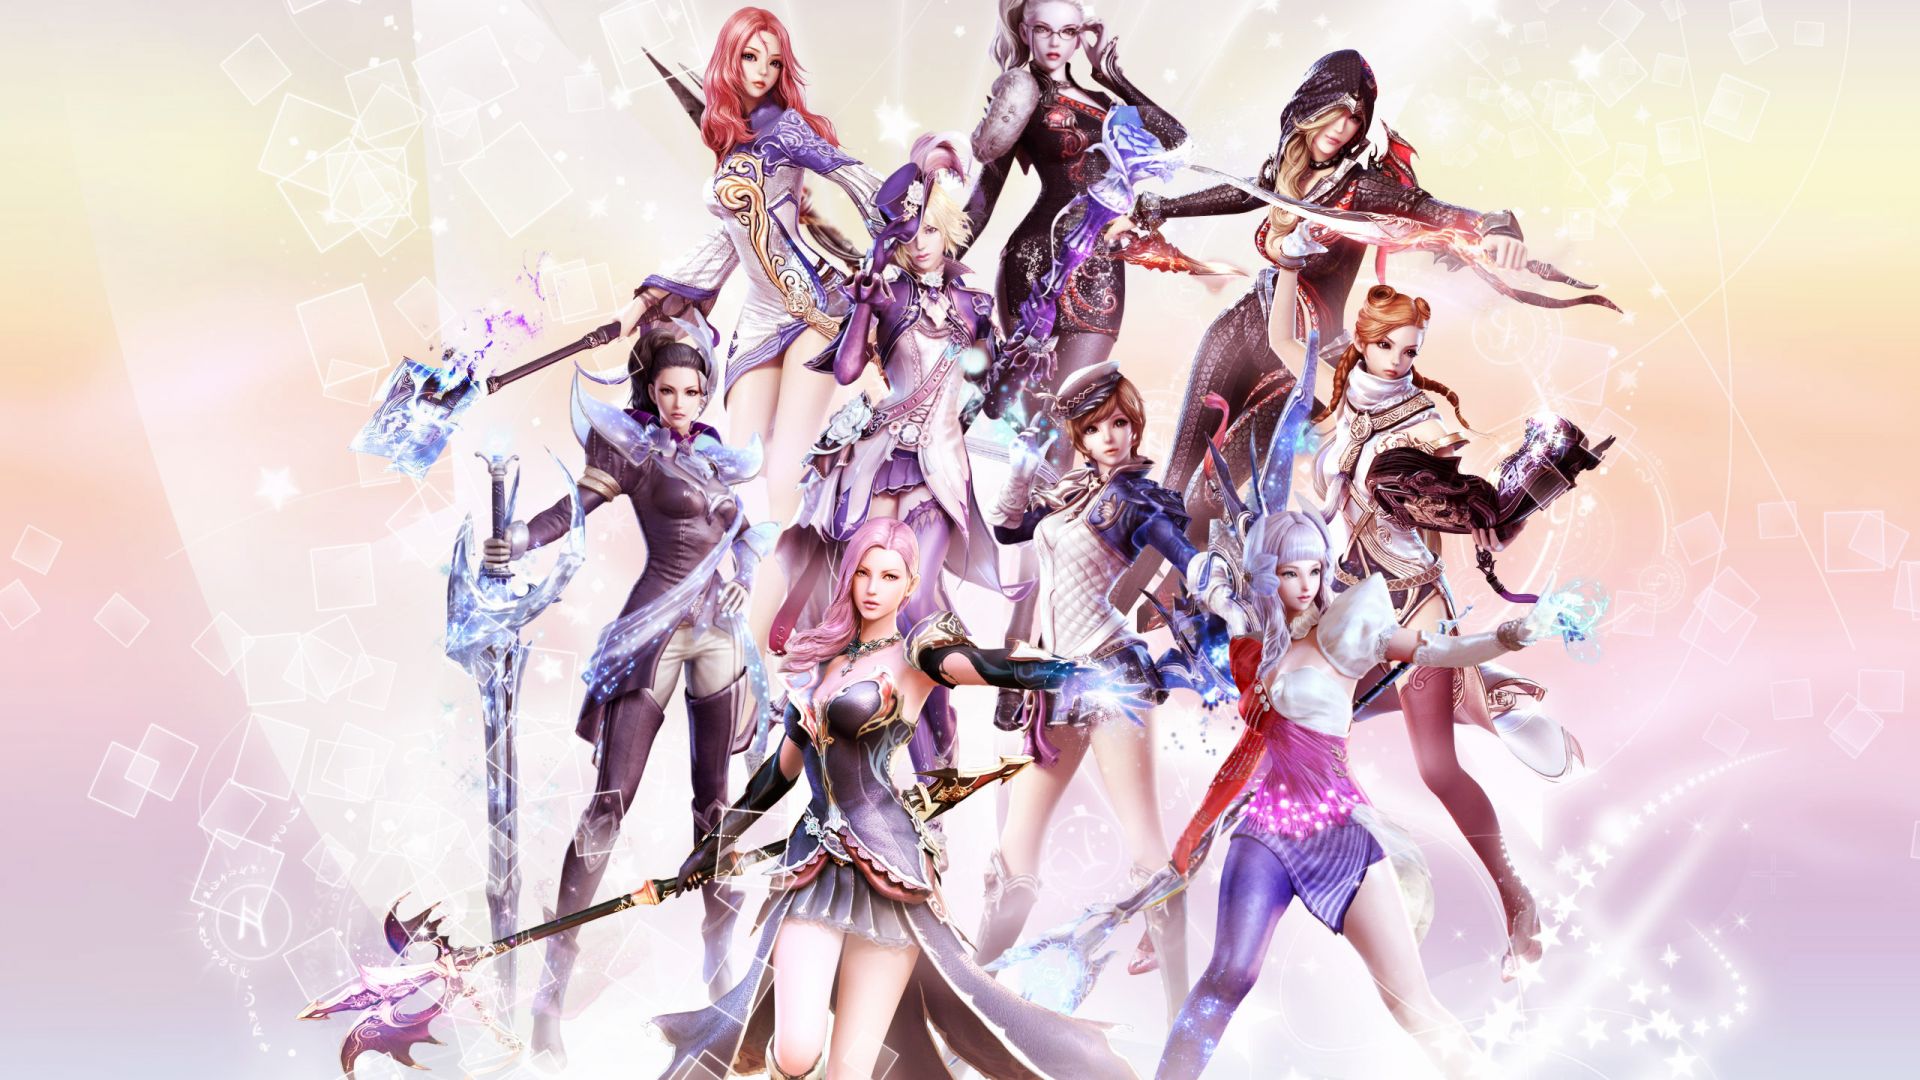 Wallpaper Aion: The Tower of Eternity video game, girl warriors